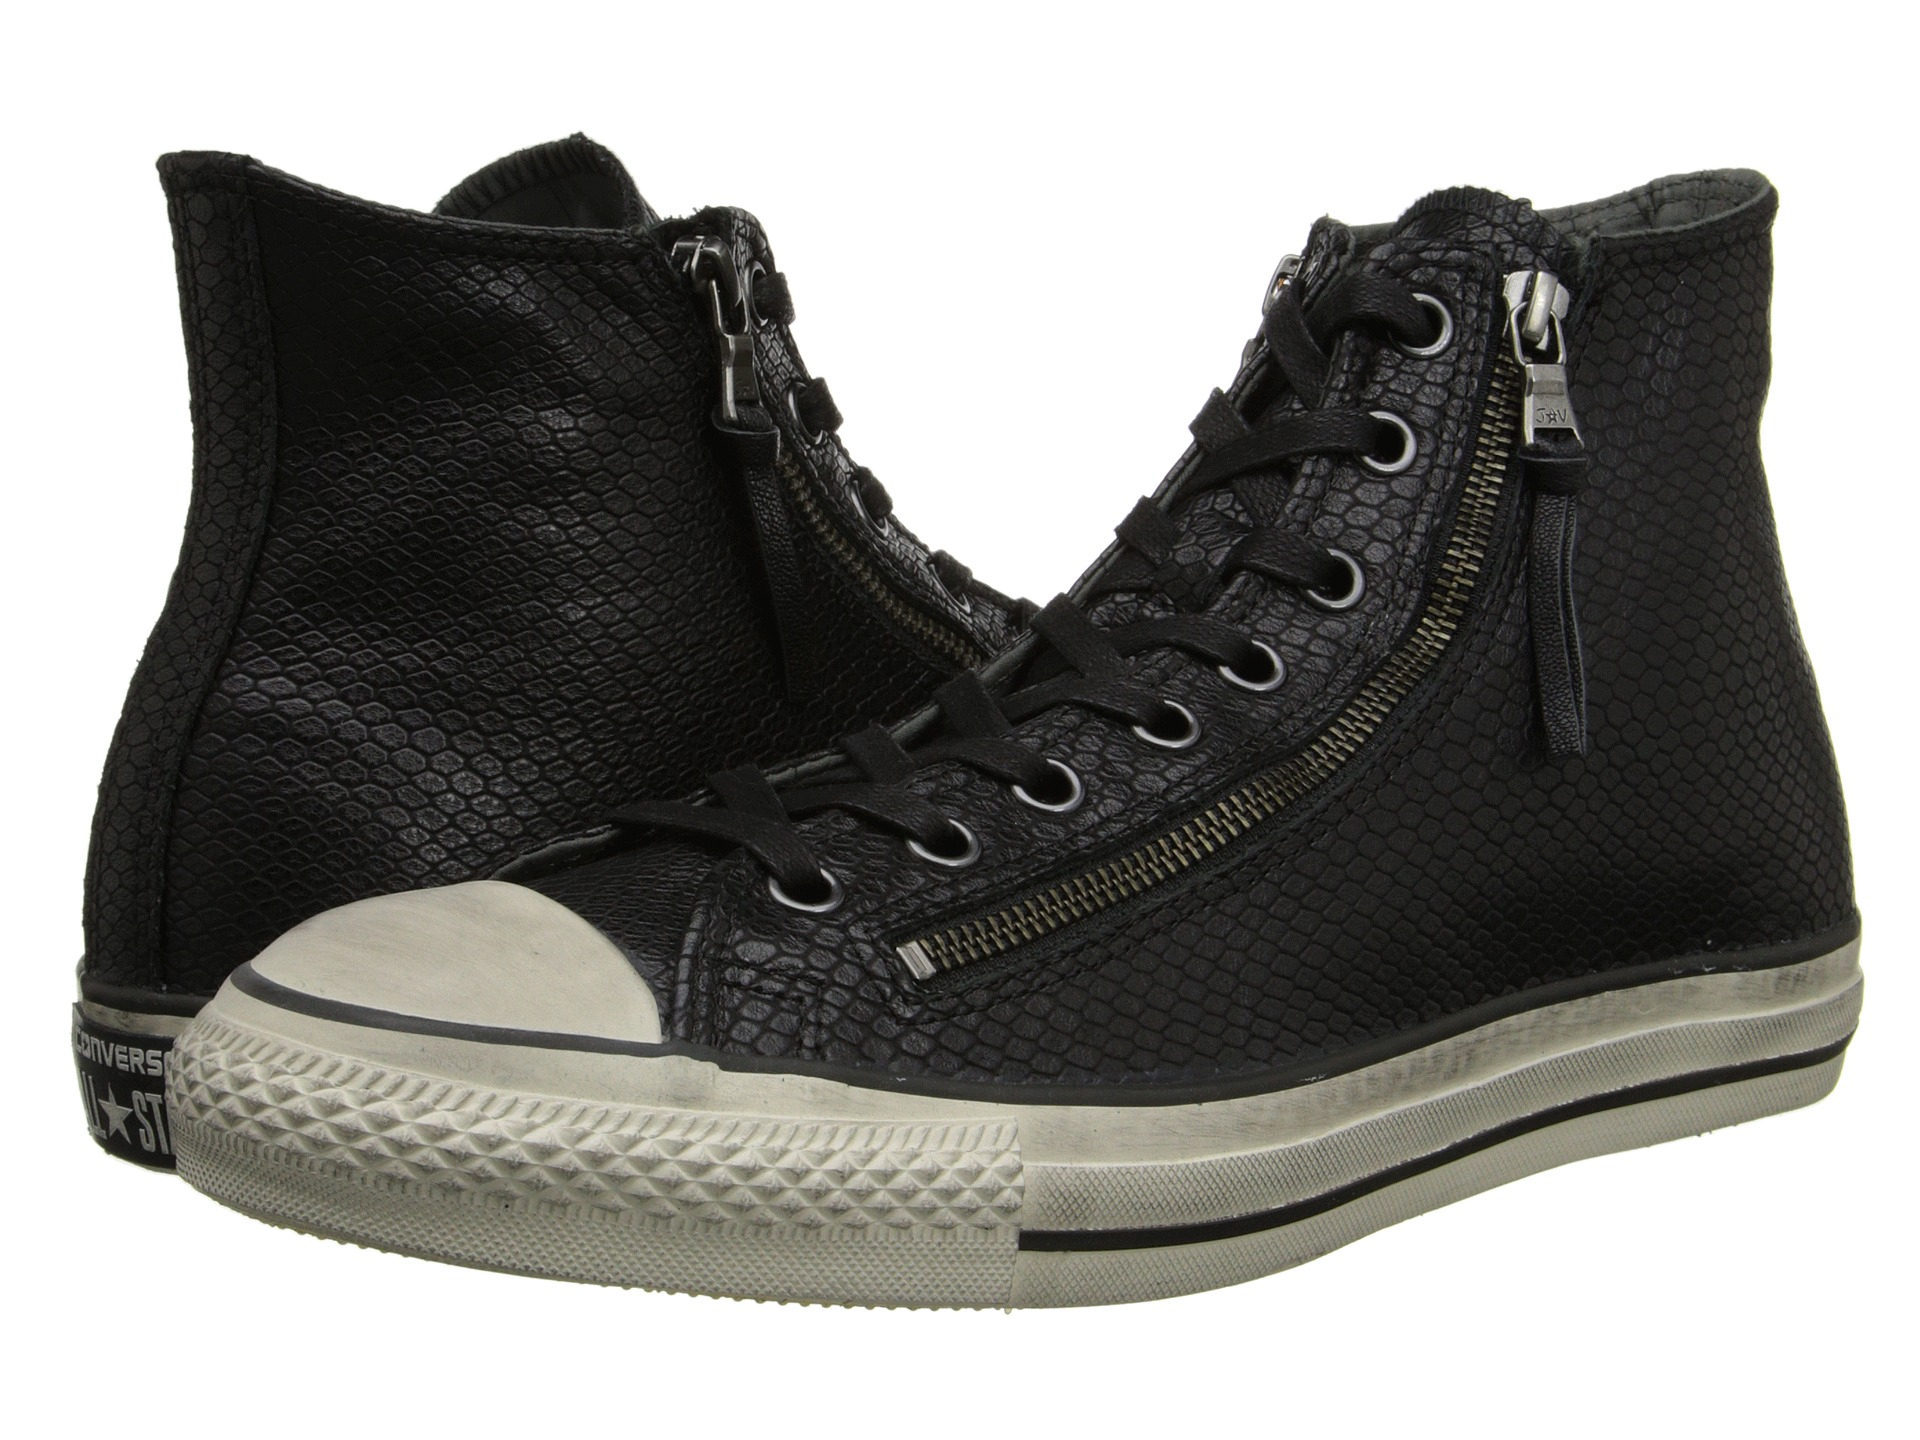 Converse Chuck Taylor All Star Leather Double Zip Black Snake - Lyst